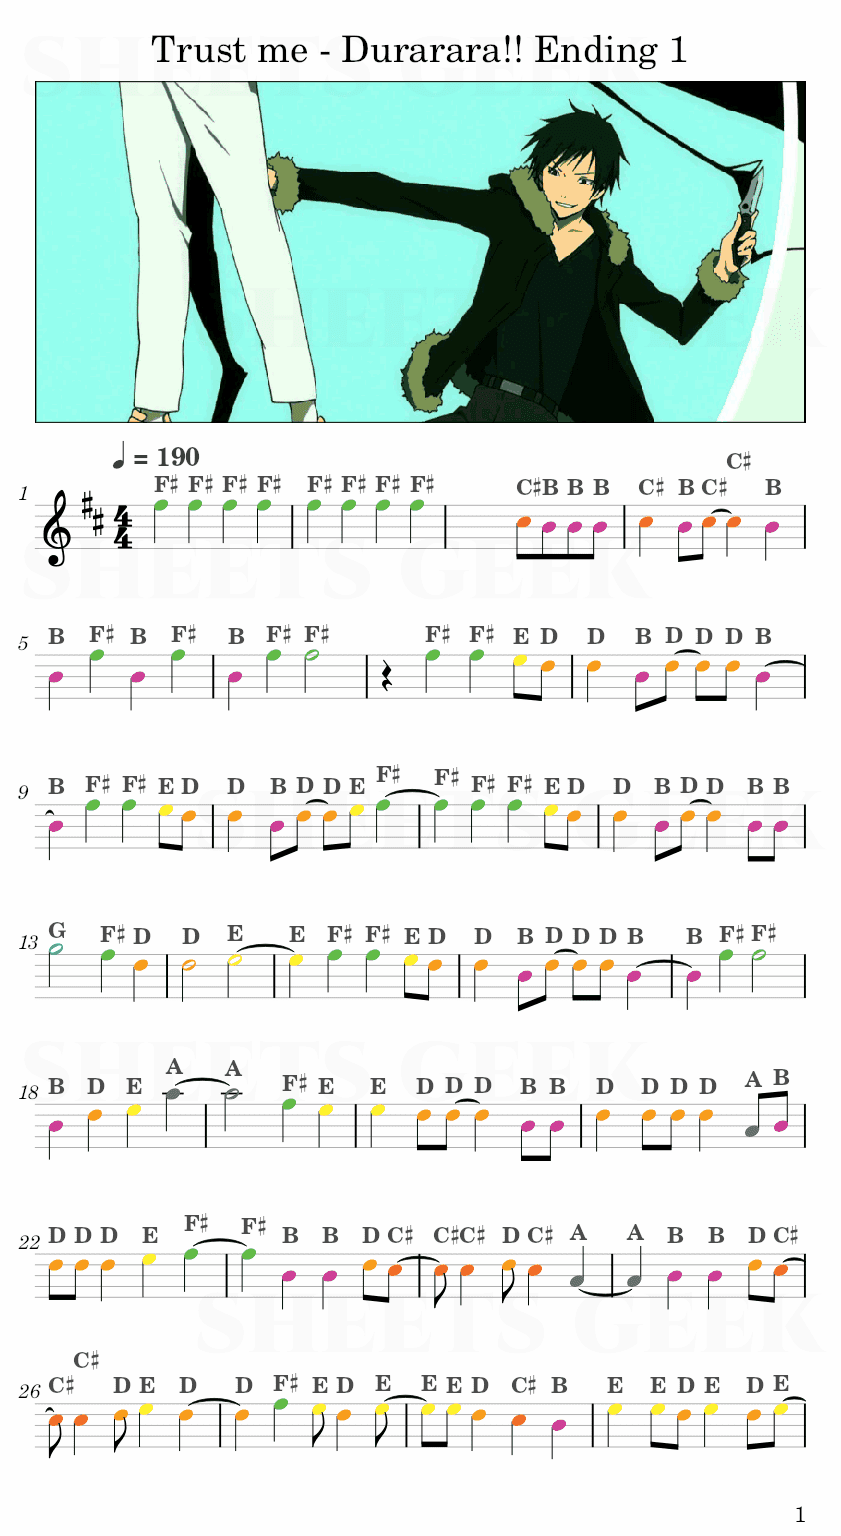 Trust me - Durarara!! Ending 1 Easy Sheet Music Free for piano, keyboard, flute, violin, sax, cello page 1